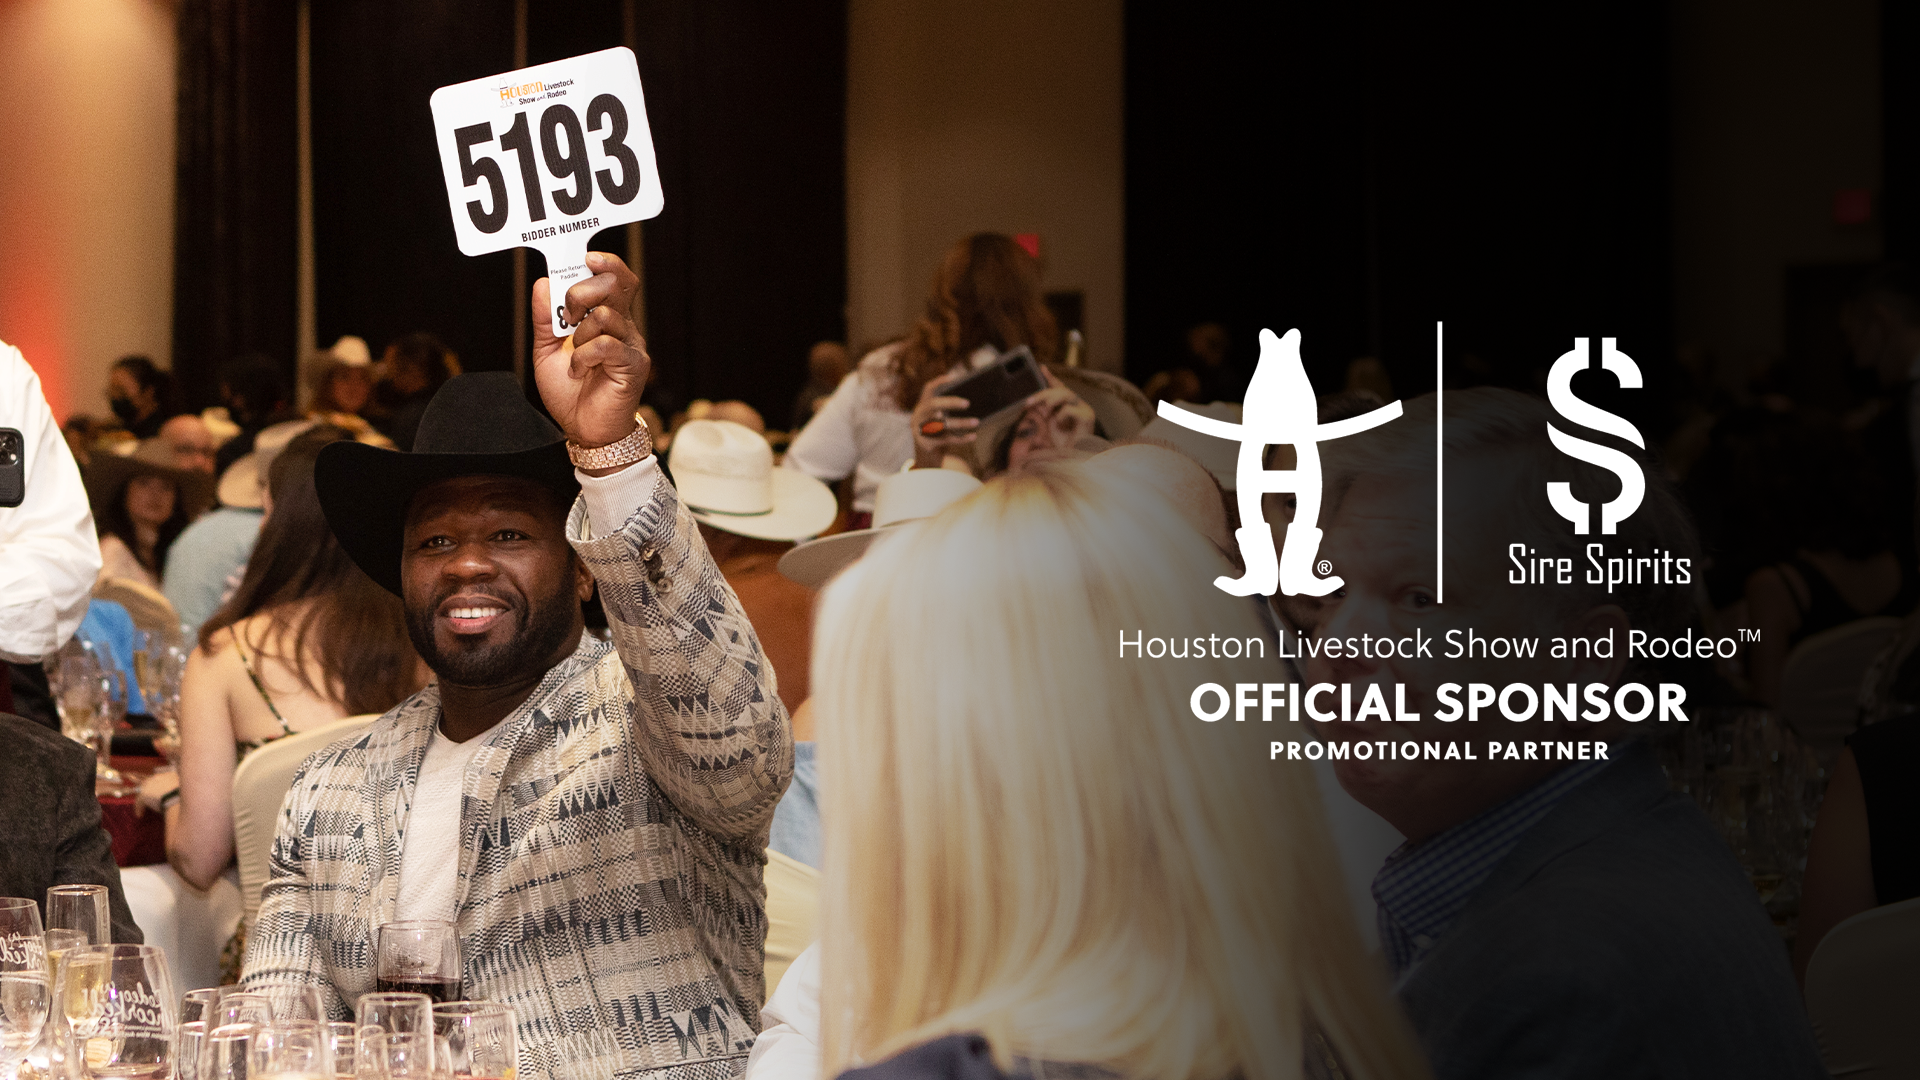 Rodeo announces partnership with Curtis “50 Cent” Jacksons’ Sire Spirits for 2024